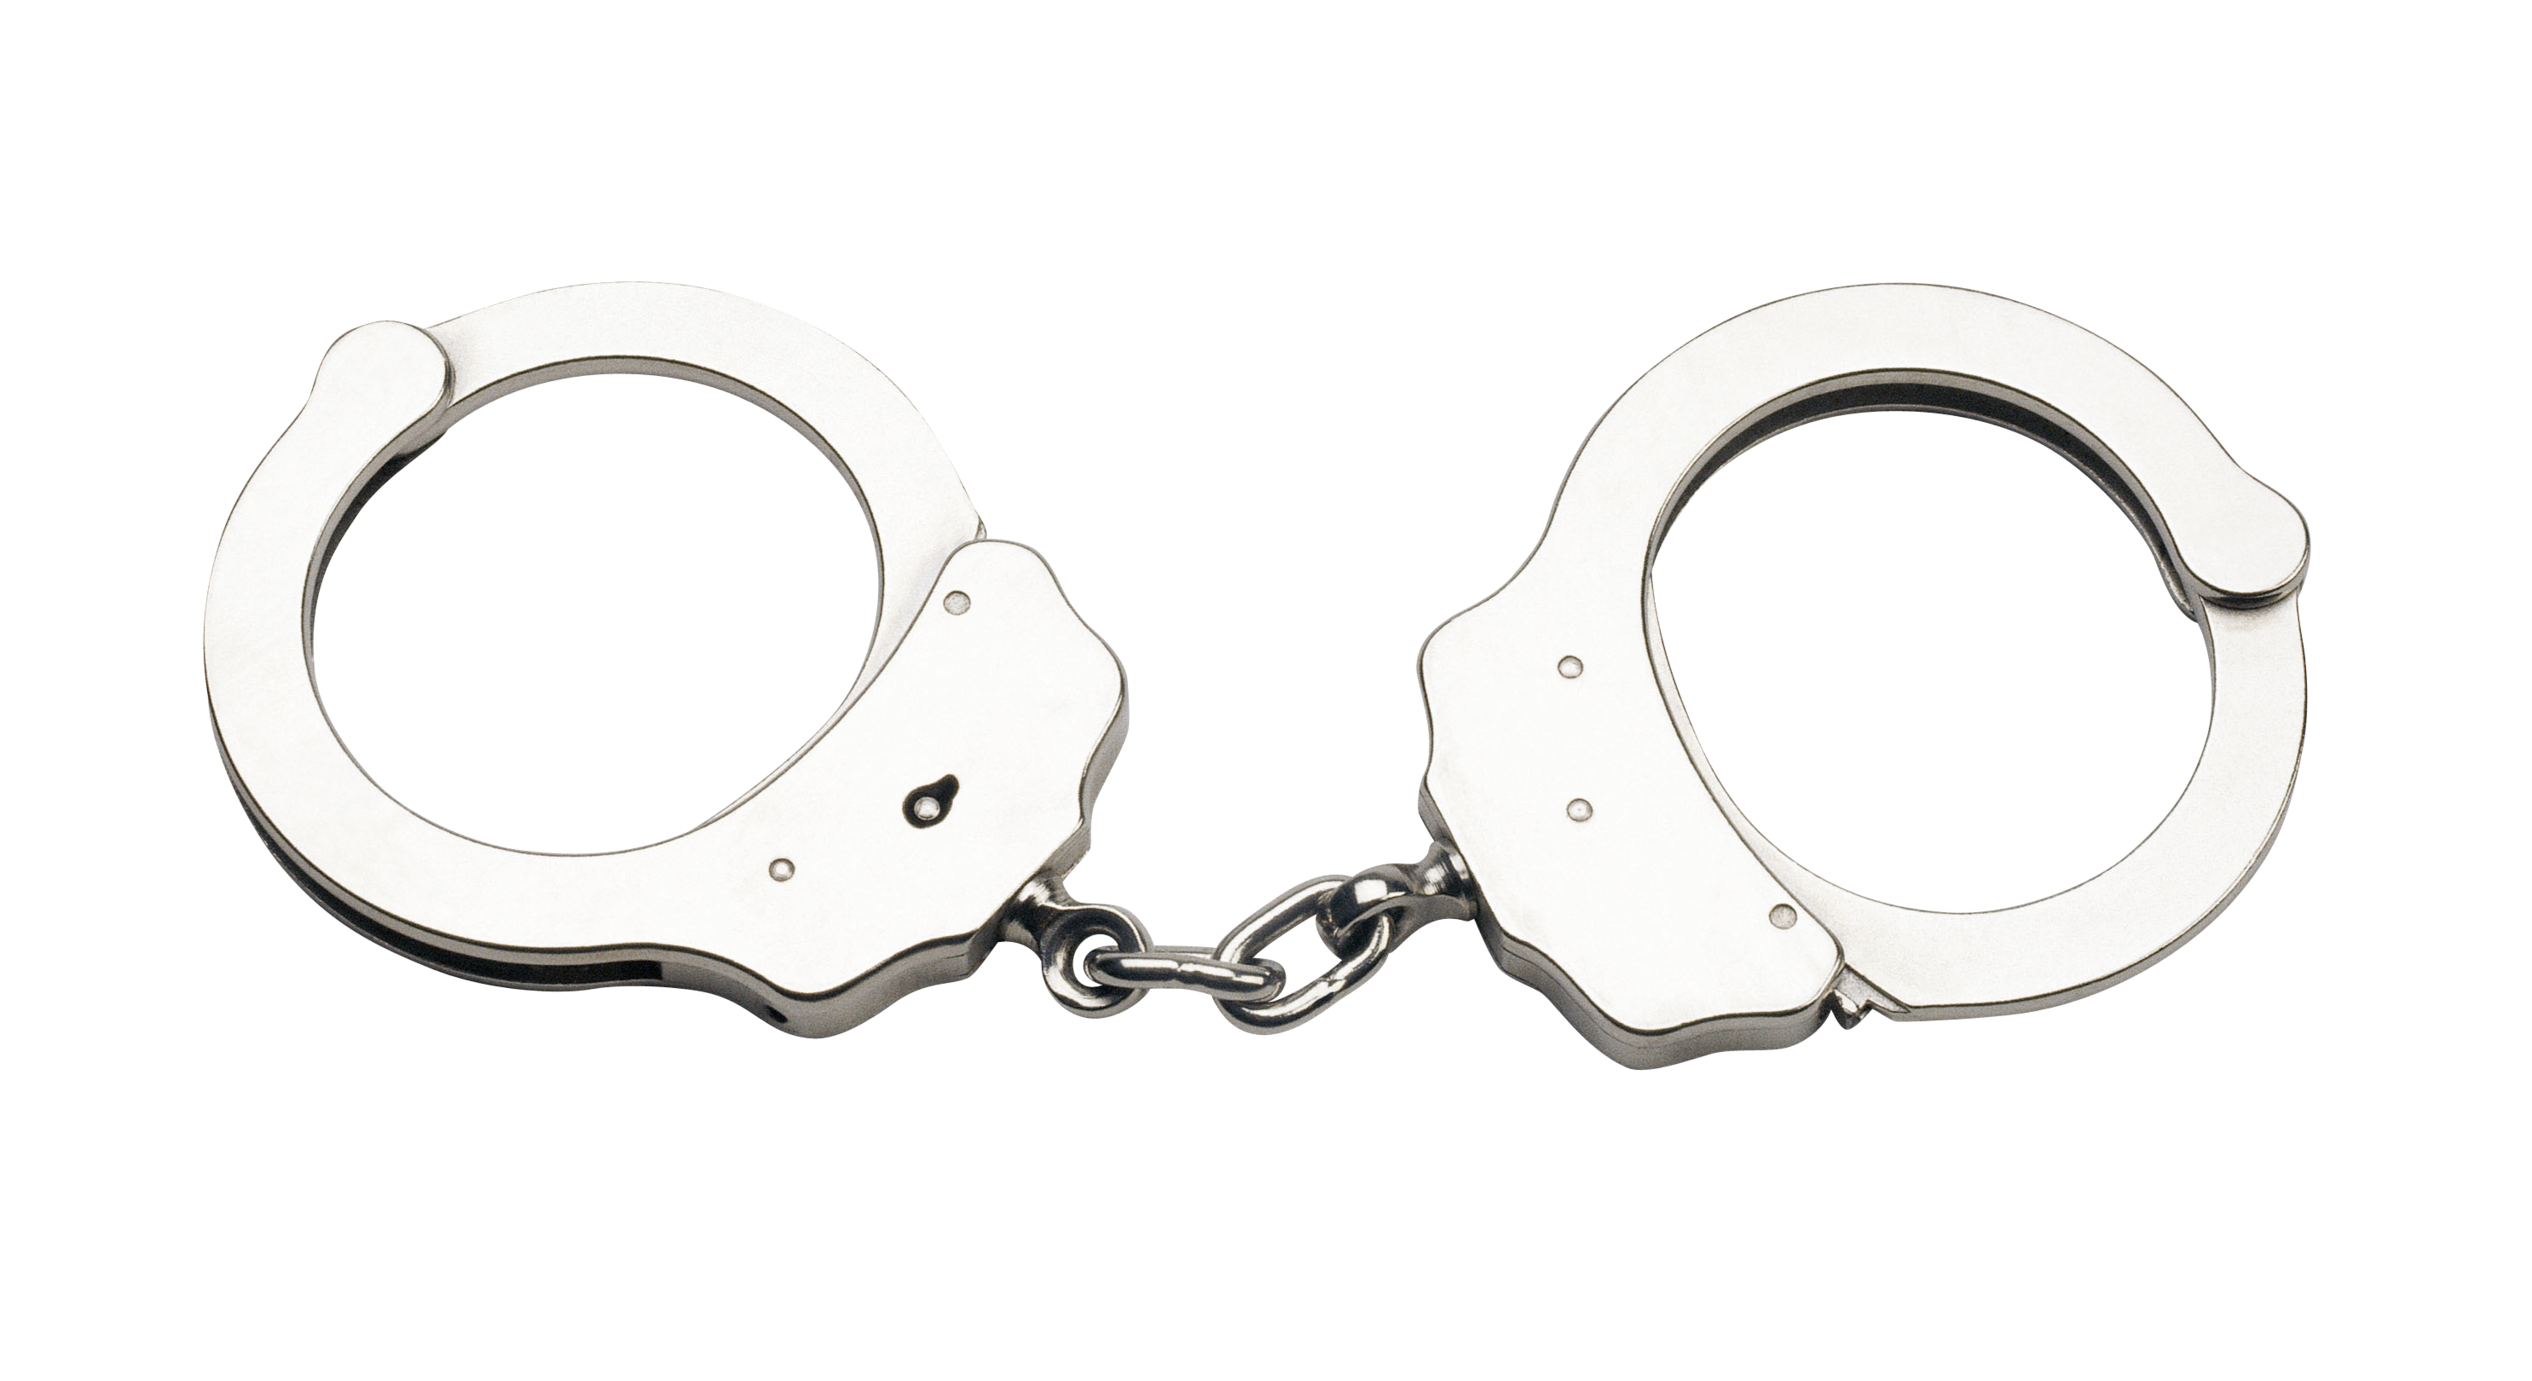 Cuff, handcuff, download free handcuffs transparent PNG images for your wor...